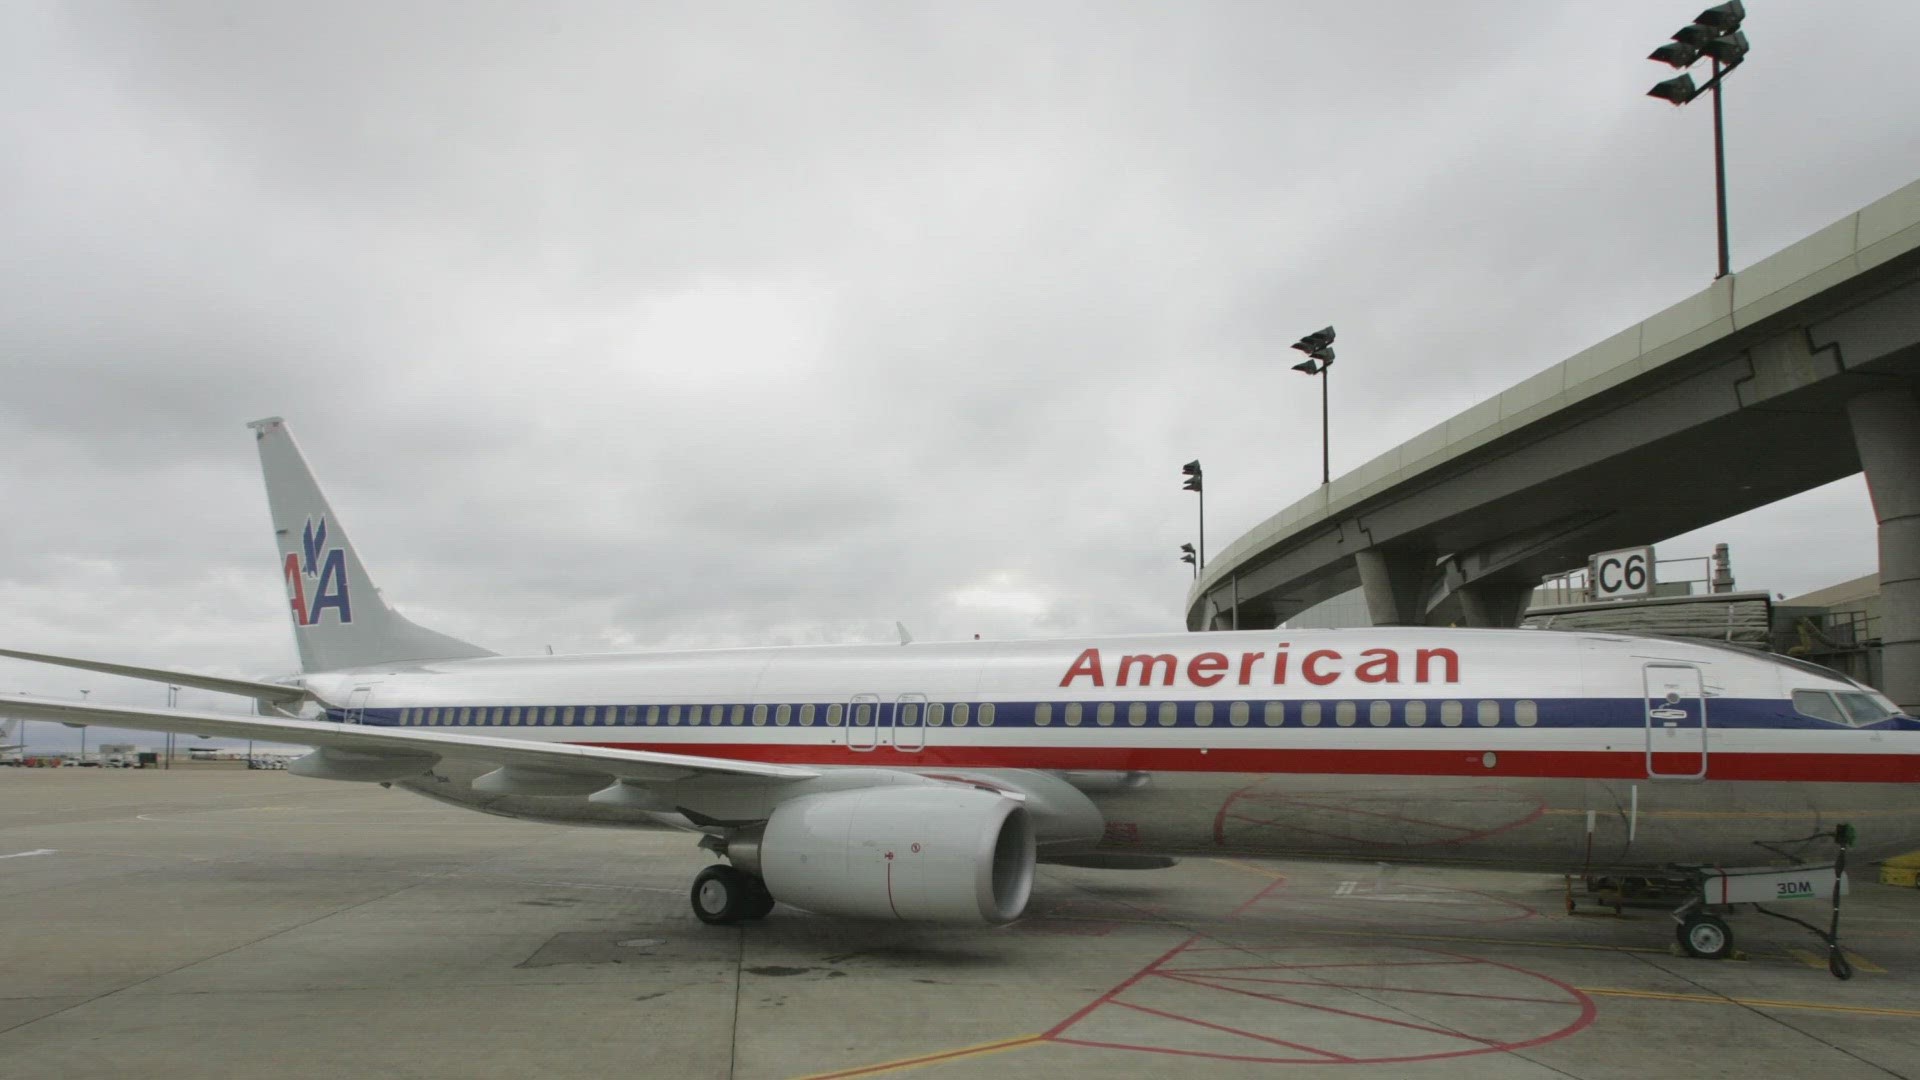 American Airlines said they are fully cooperating with the FAA's investigation into the incident.